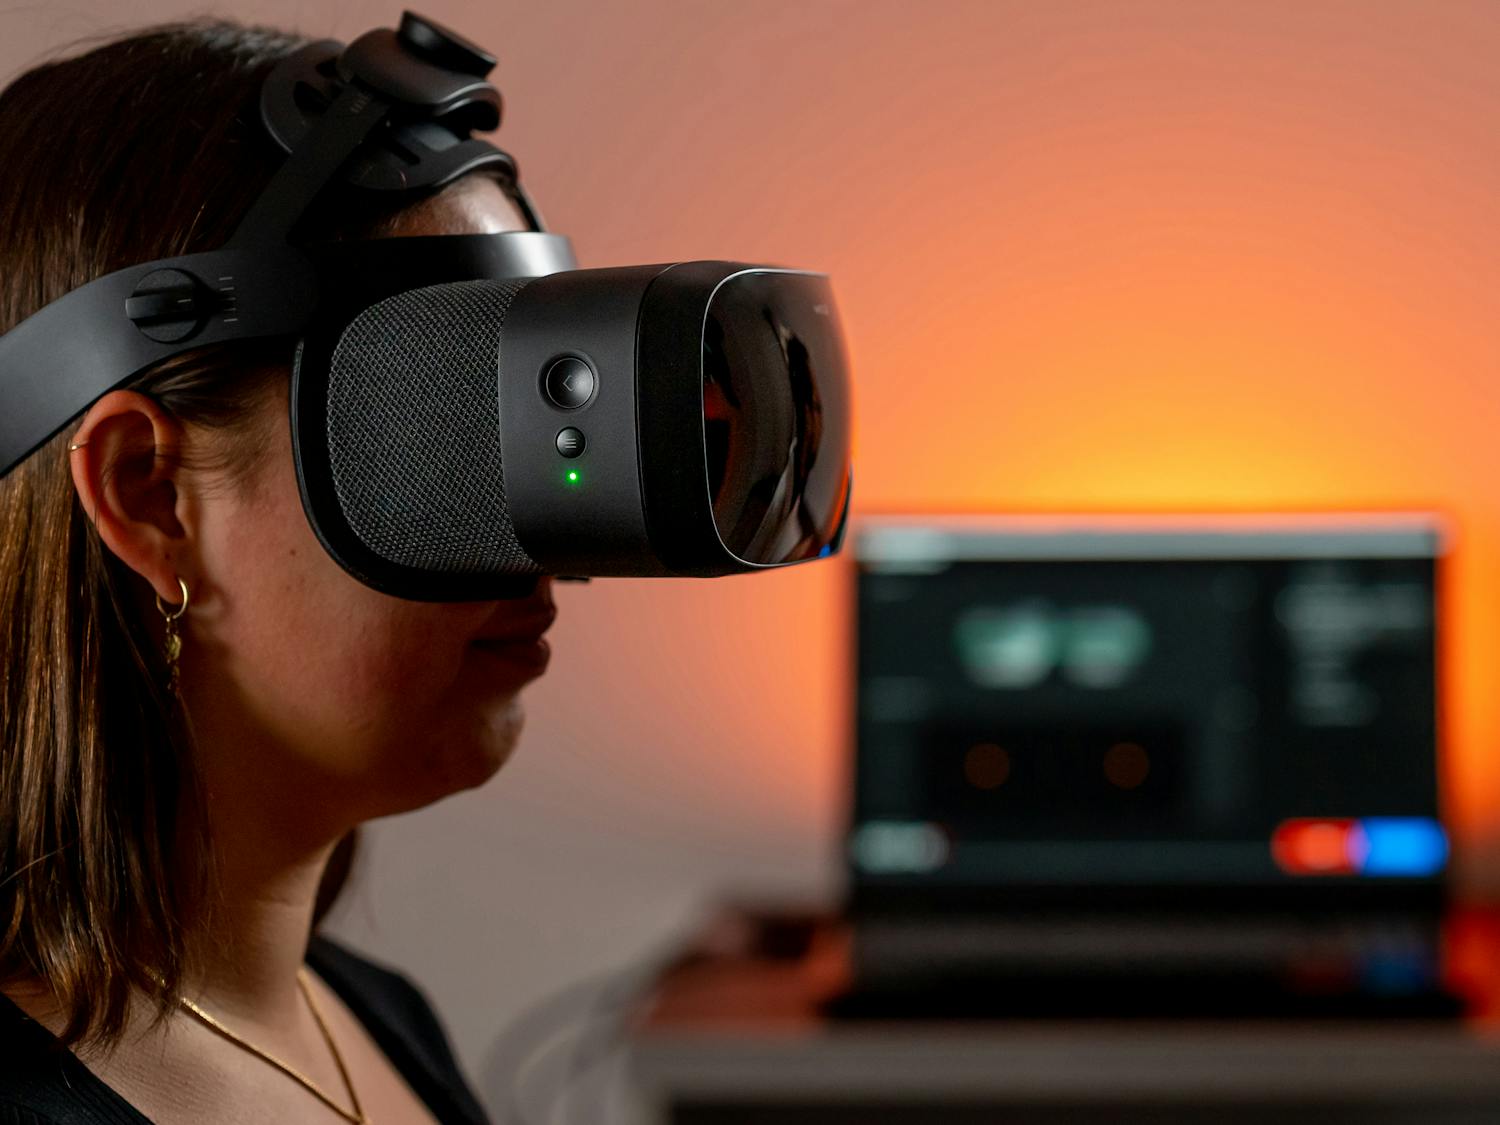 machineMD's new device, neos®, to detect brain disorders using VR